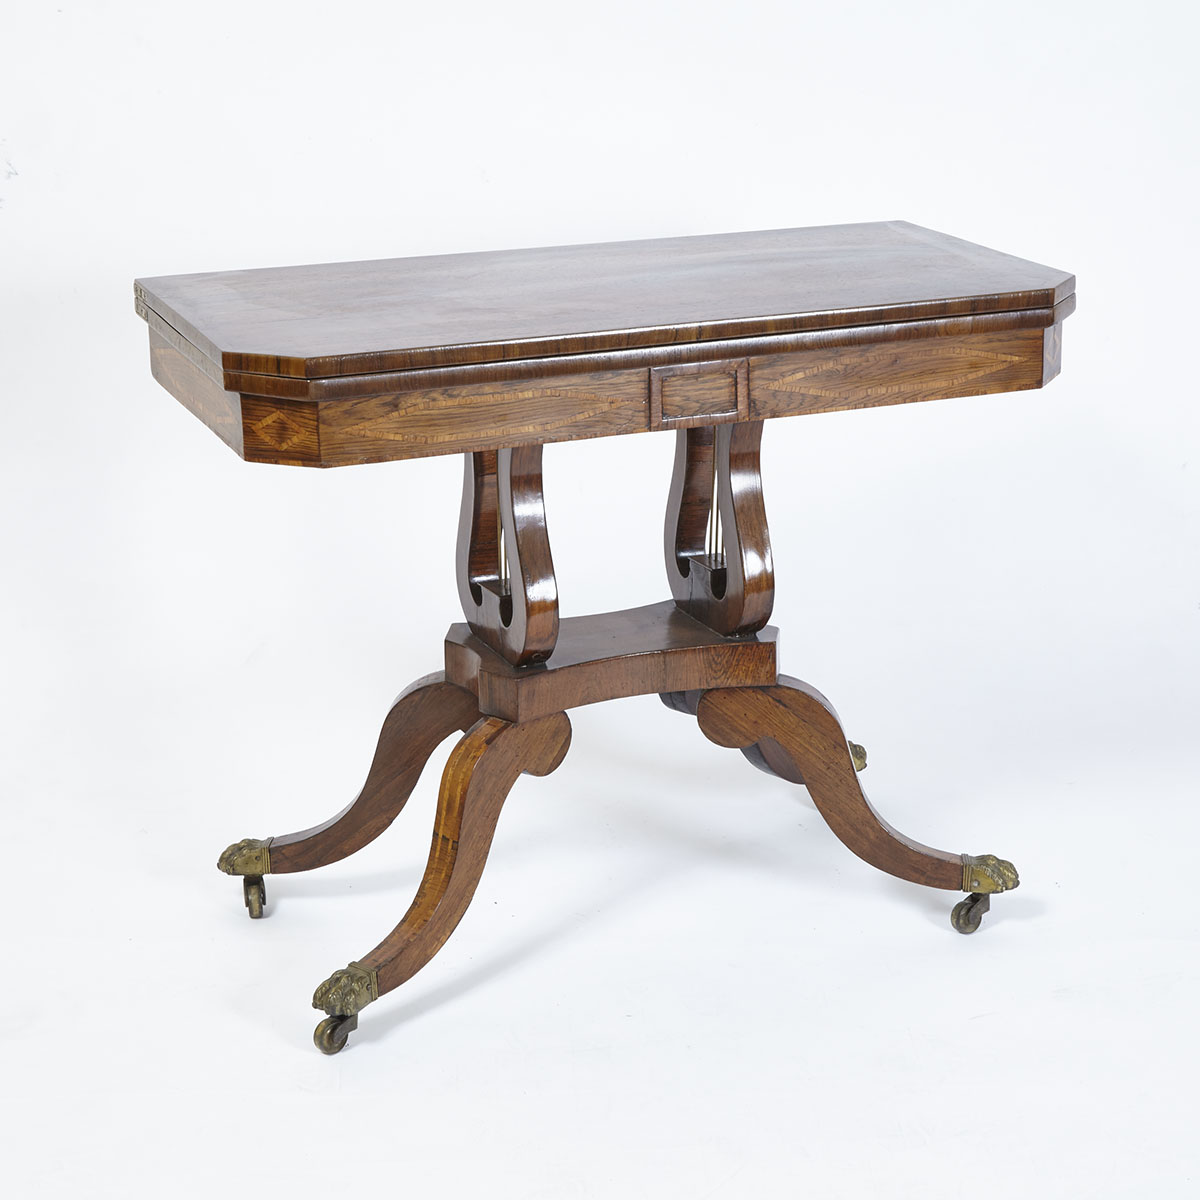 Regency Rosewood Fold Over Games Table, early 19th century